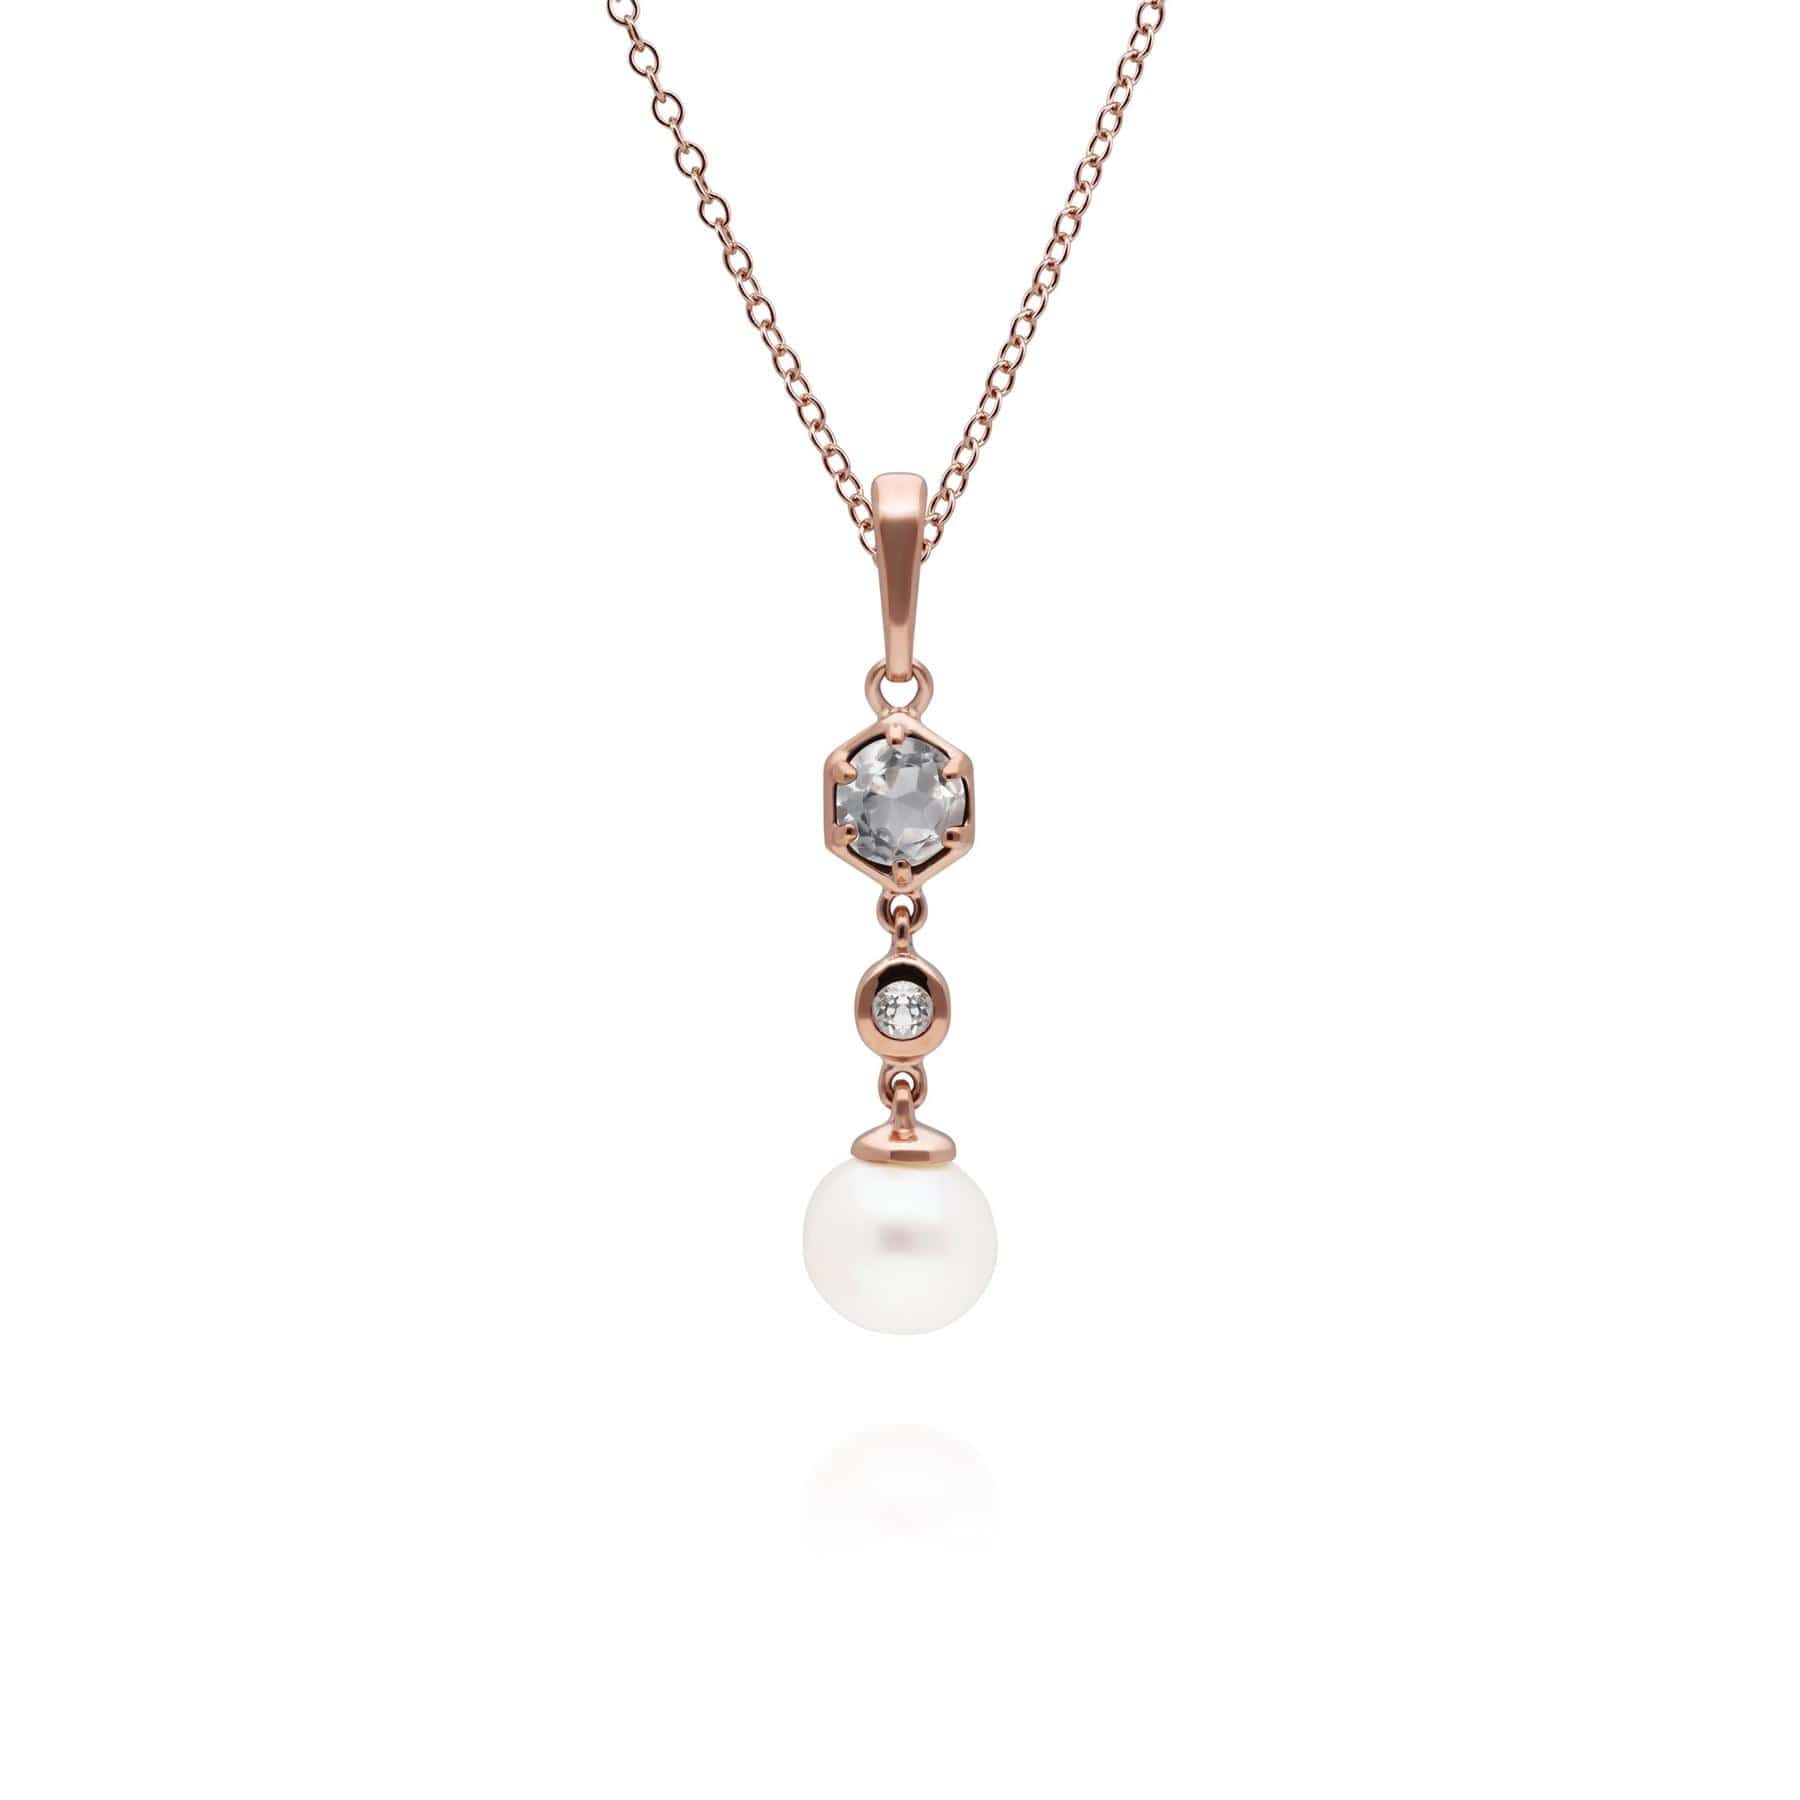 Photos - Pendant / Choker Necklace Modern Pearl & Topaz Drop Pendant in Gold Plated Silver